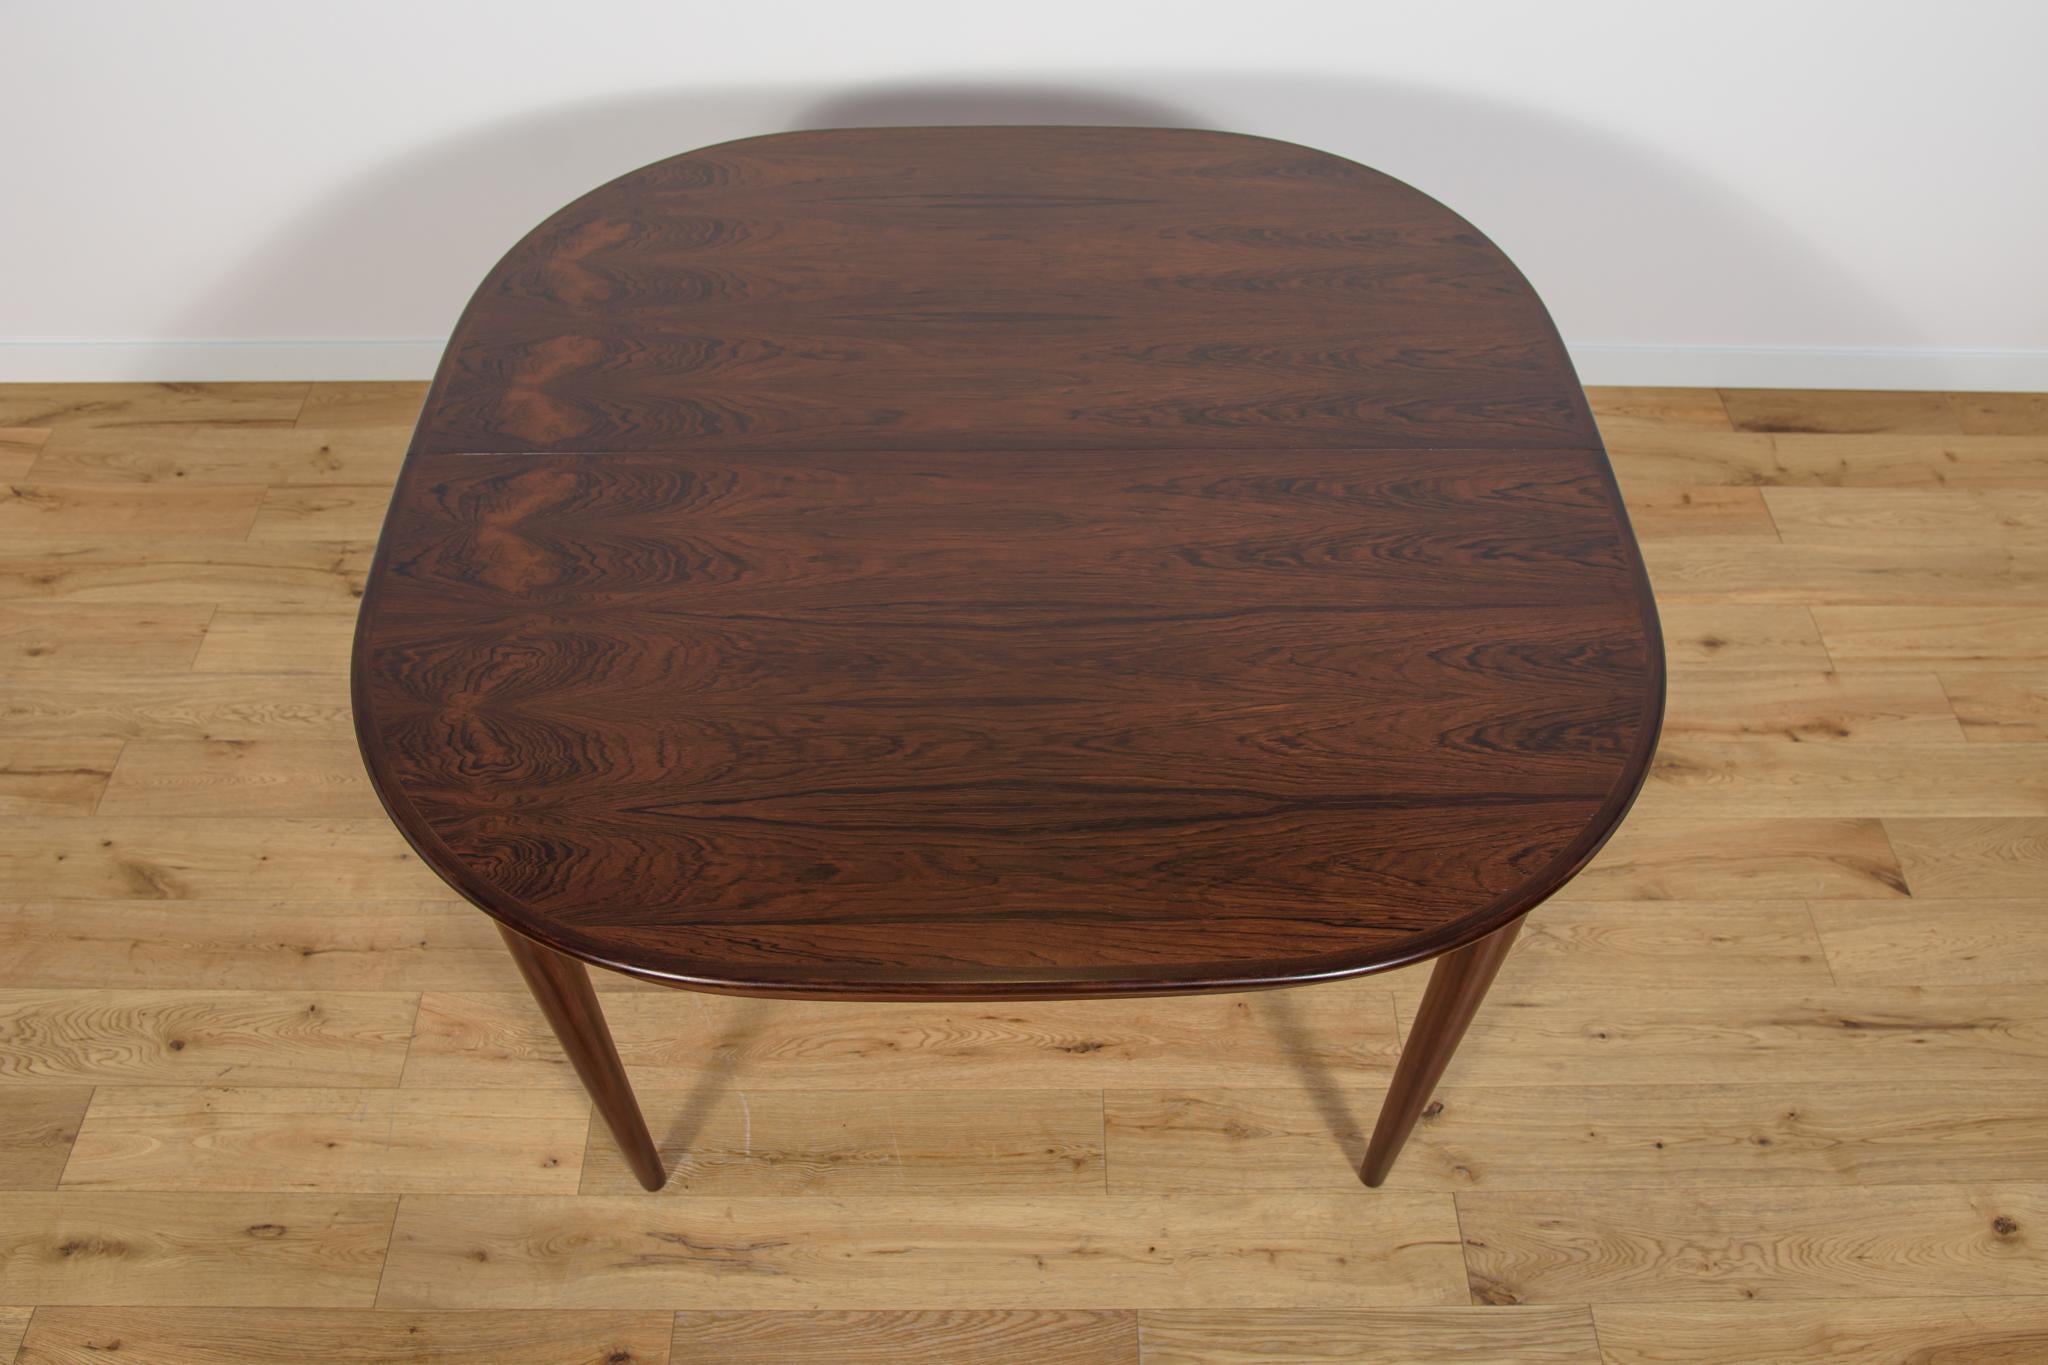 Danish Mid-Century Rosewood Extendable Dining Table from Skovmand & Andersen, 1960s For Sale